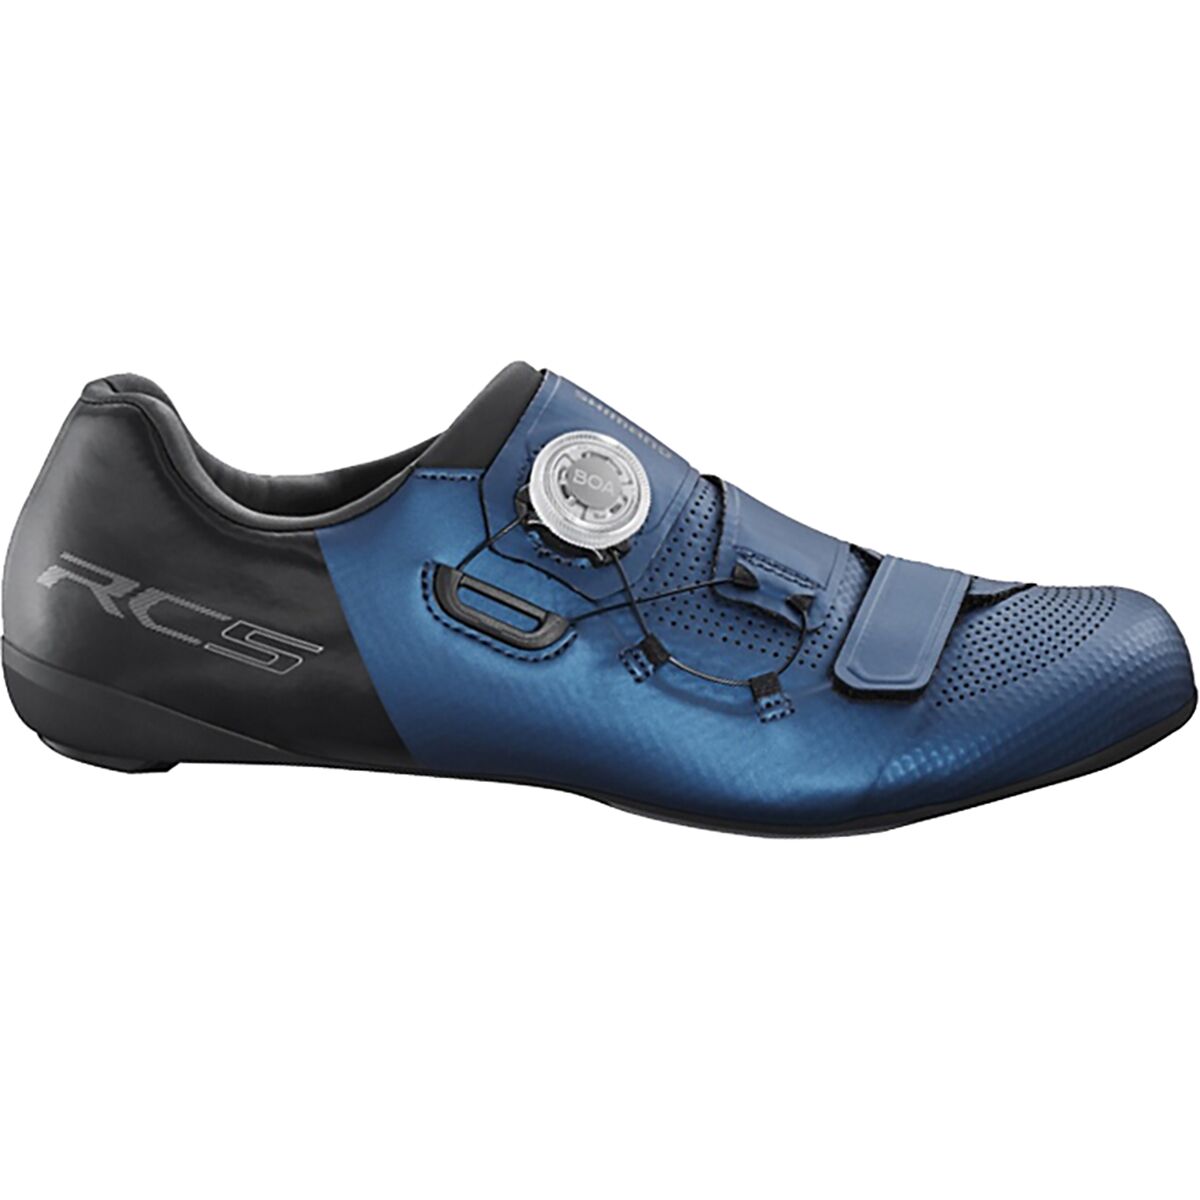 Shimano RC502 Limited Edition Cycling Shoe - Men's Blue 48.0